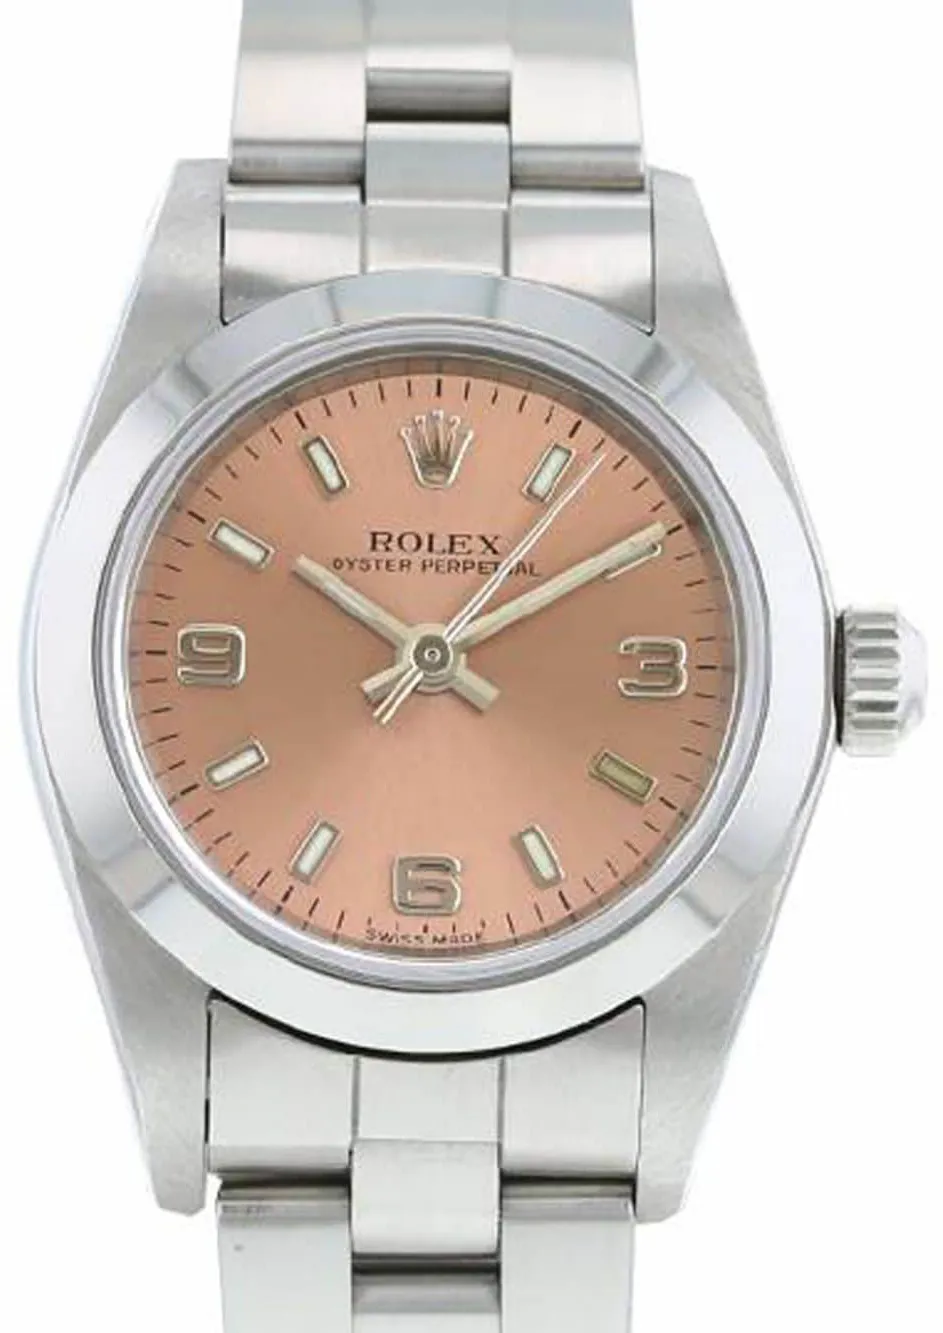 Rolex Oyster Perpetual 401472 25mm Stainless steel Silver